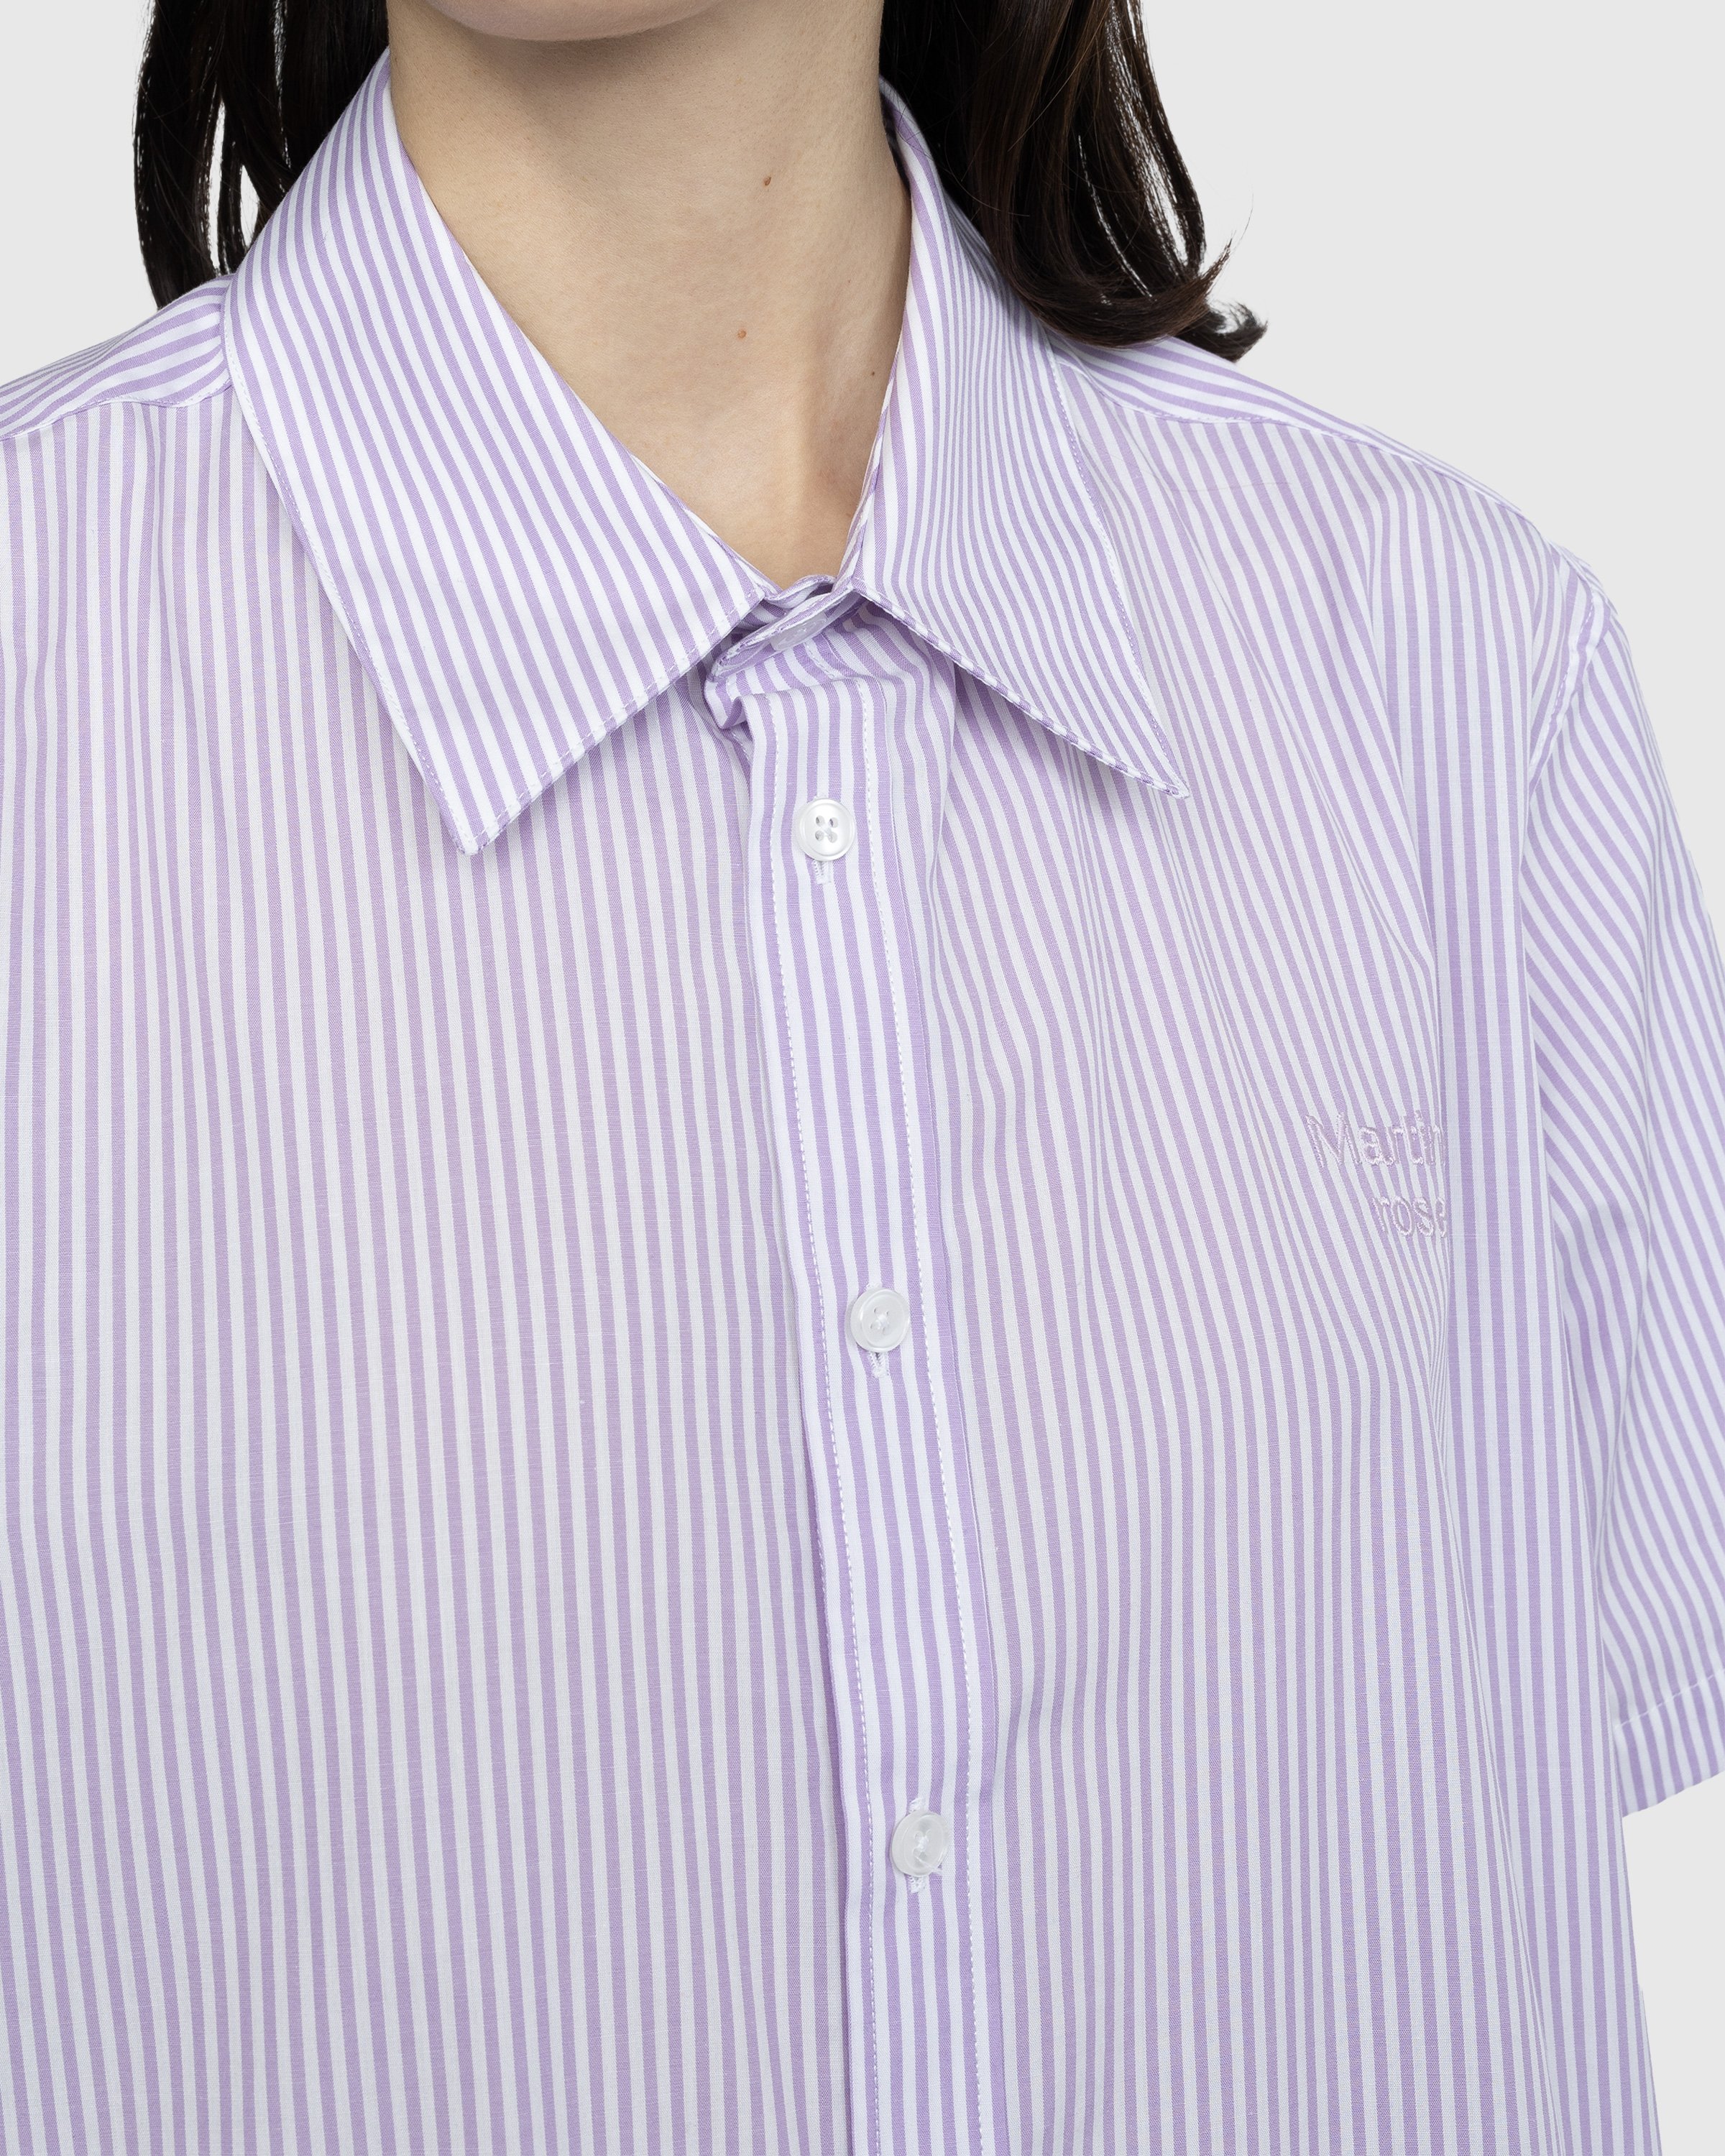 Martine Rose - Classic Short-Sleeve Button-Down Shirt Lilac and White Stripe - Clothing - Purple - Image 5